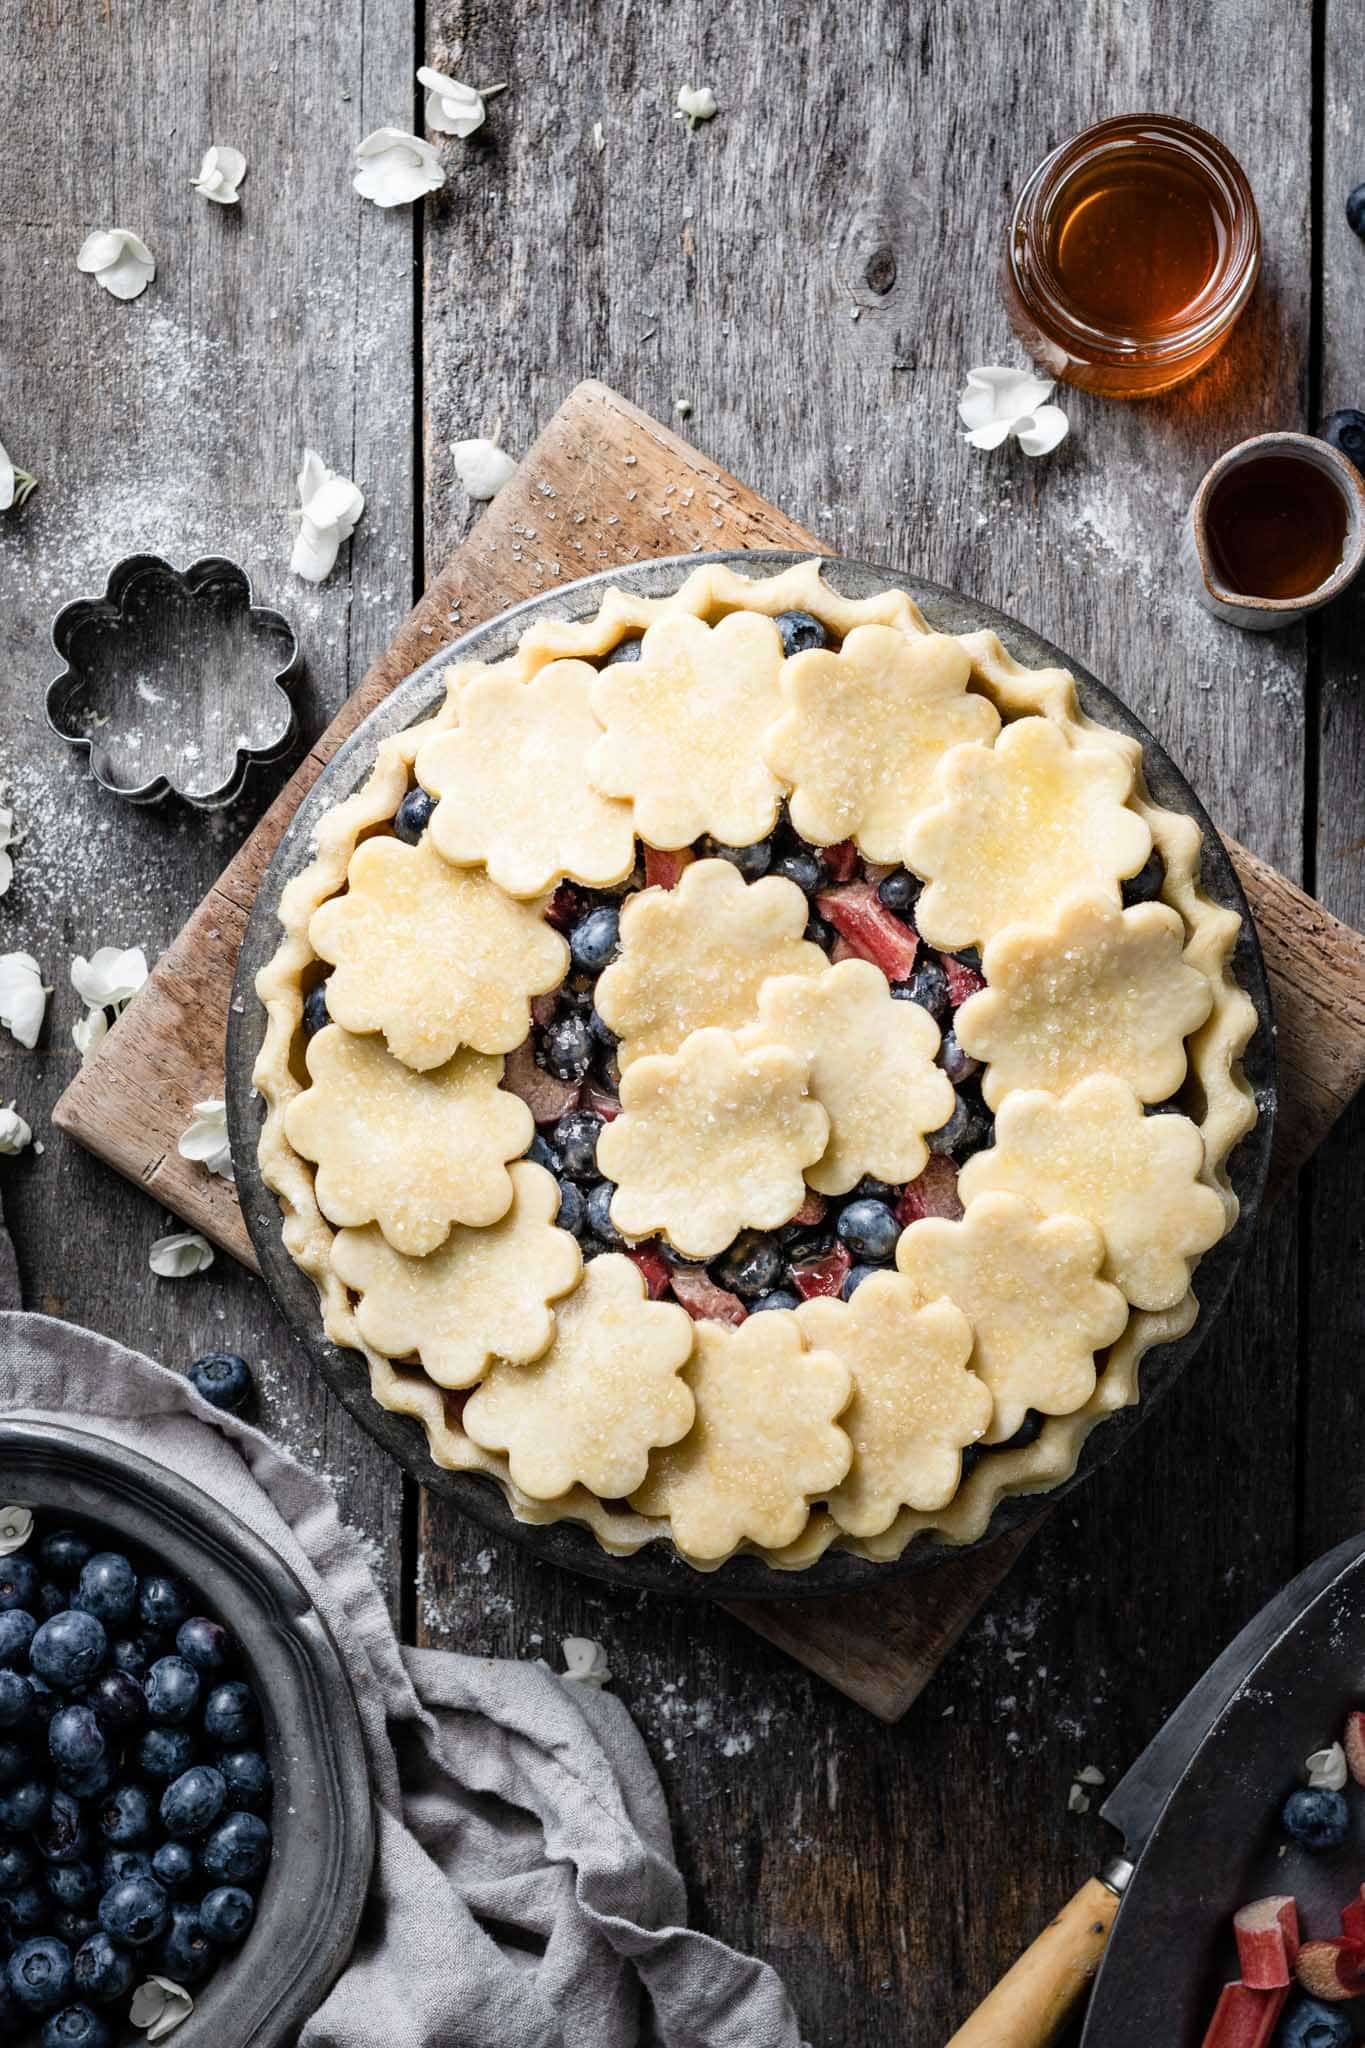 Recipe for blueberry pie with fresh rhubarb and honey.